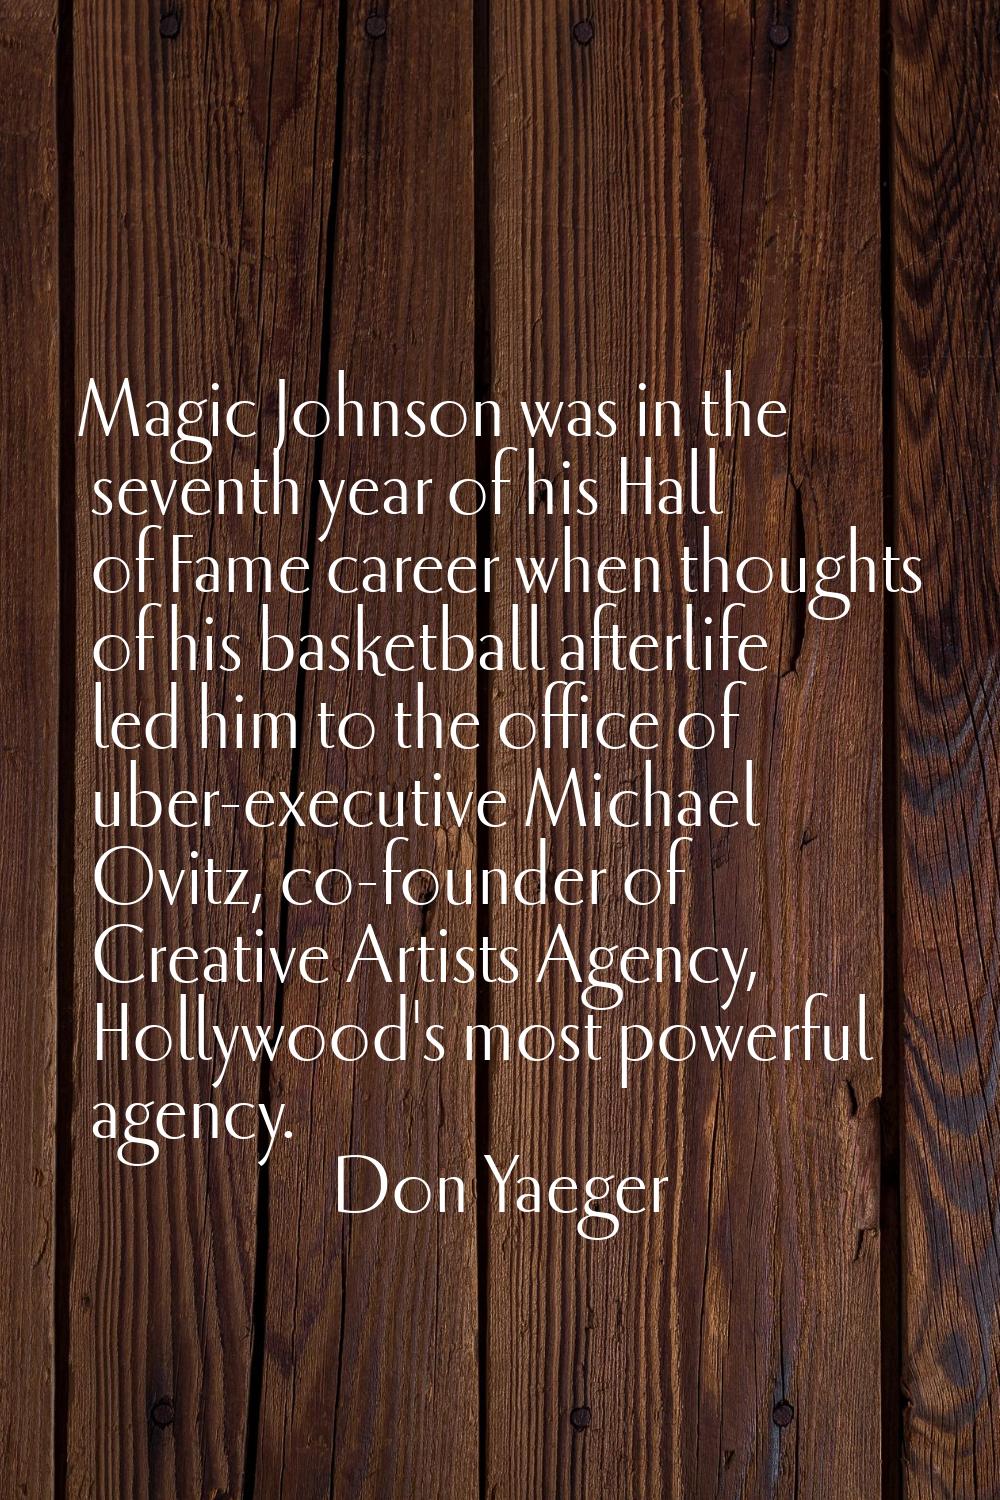 Magic Johnson was in the seventh year of his Hall of Fame career when thoughts of his basketball af